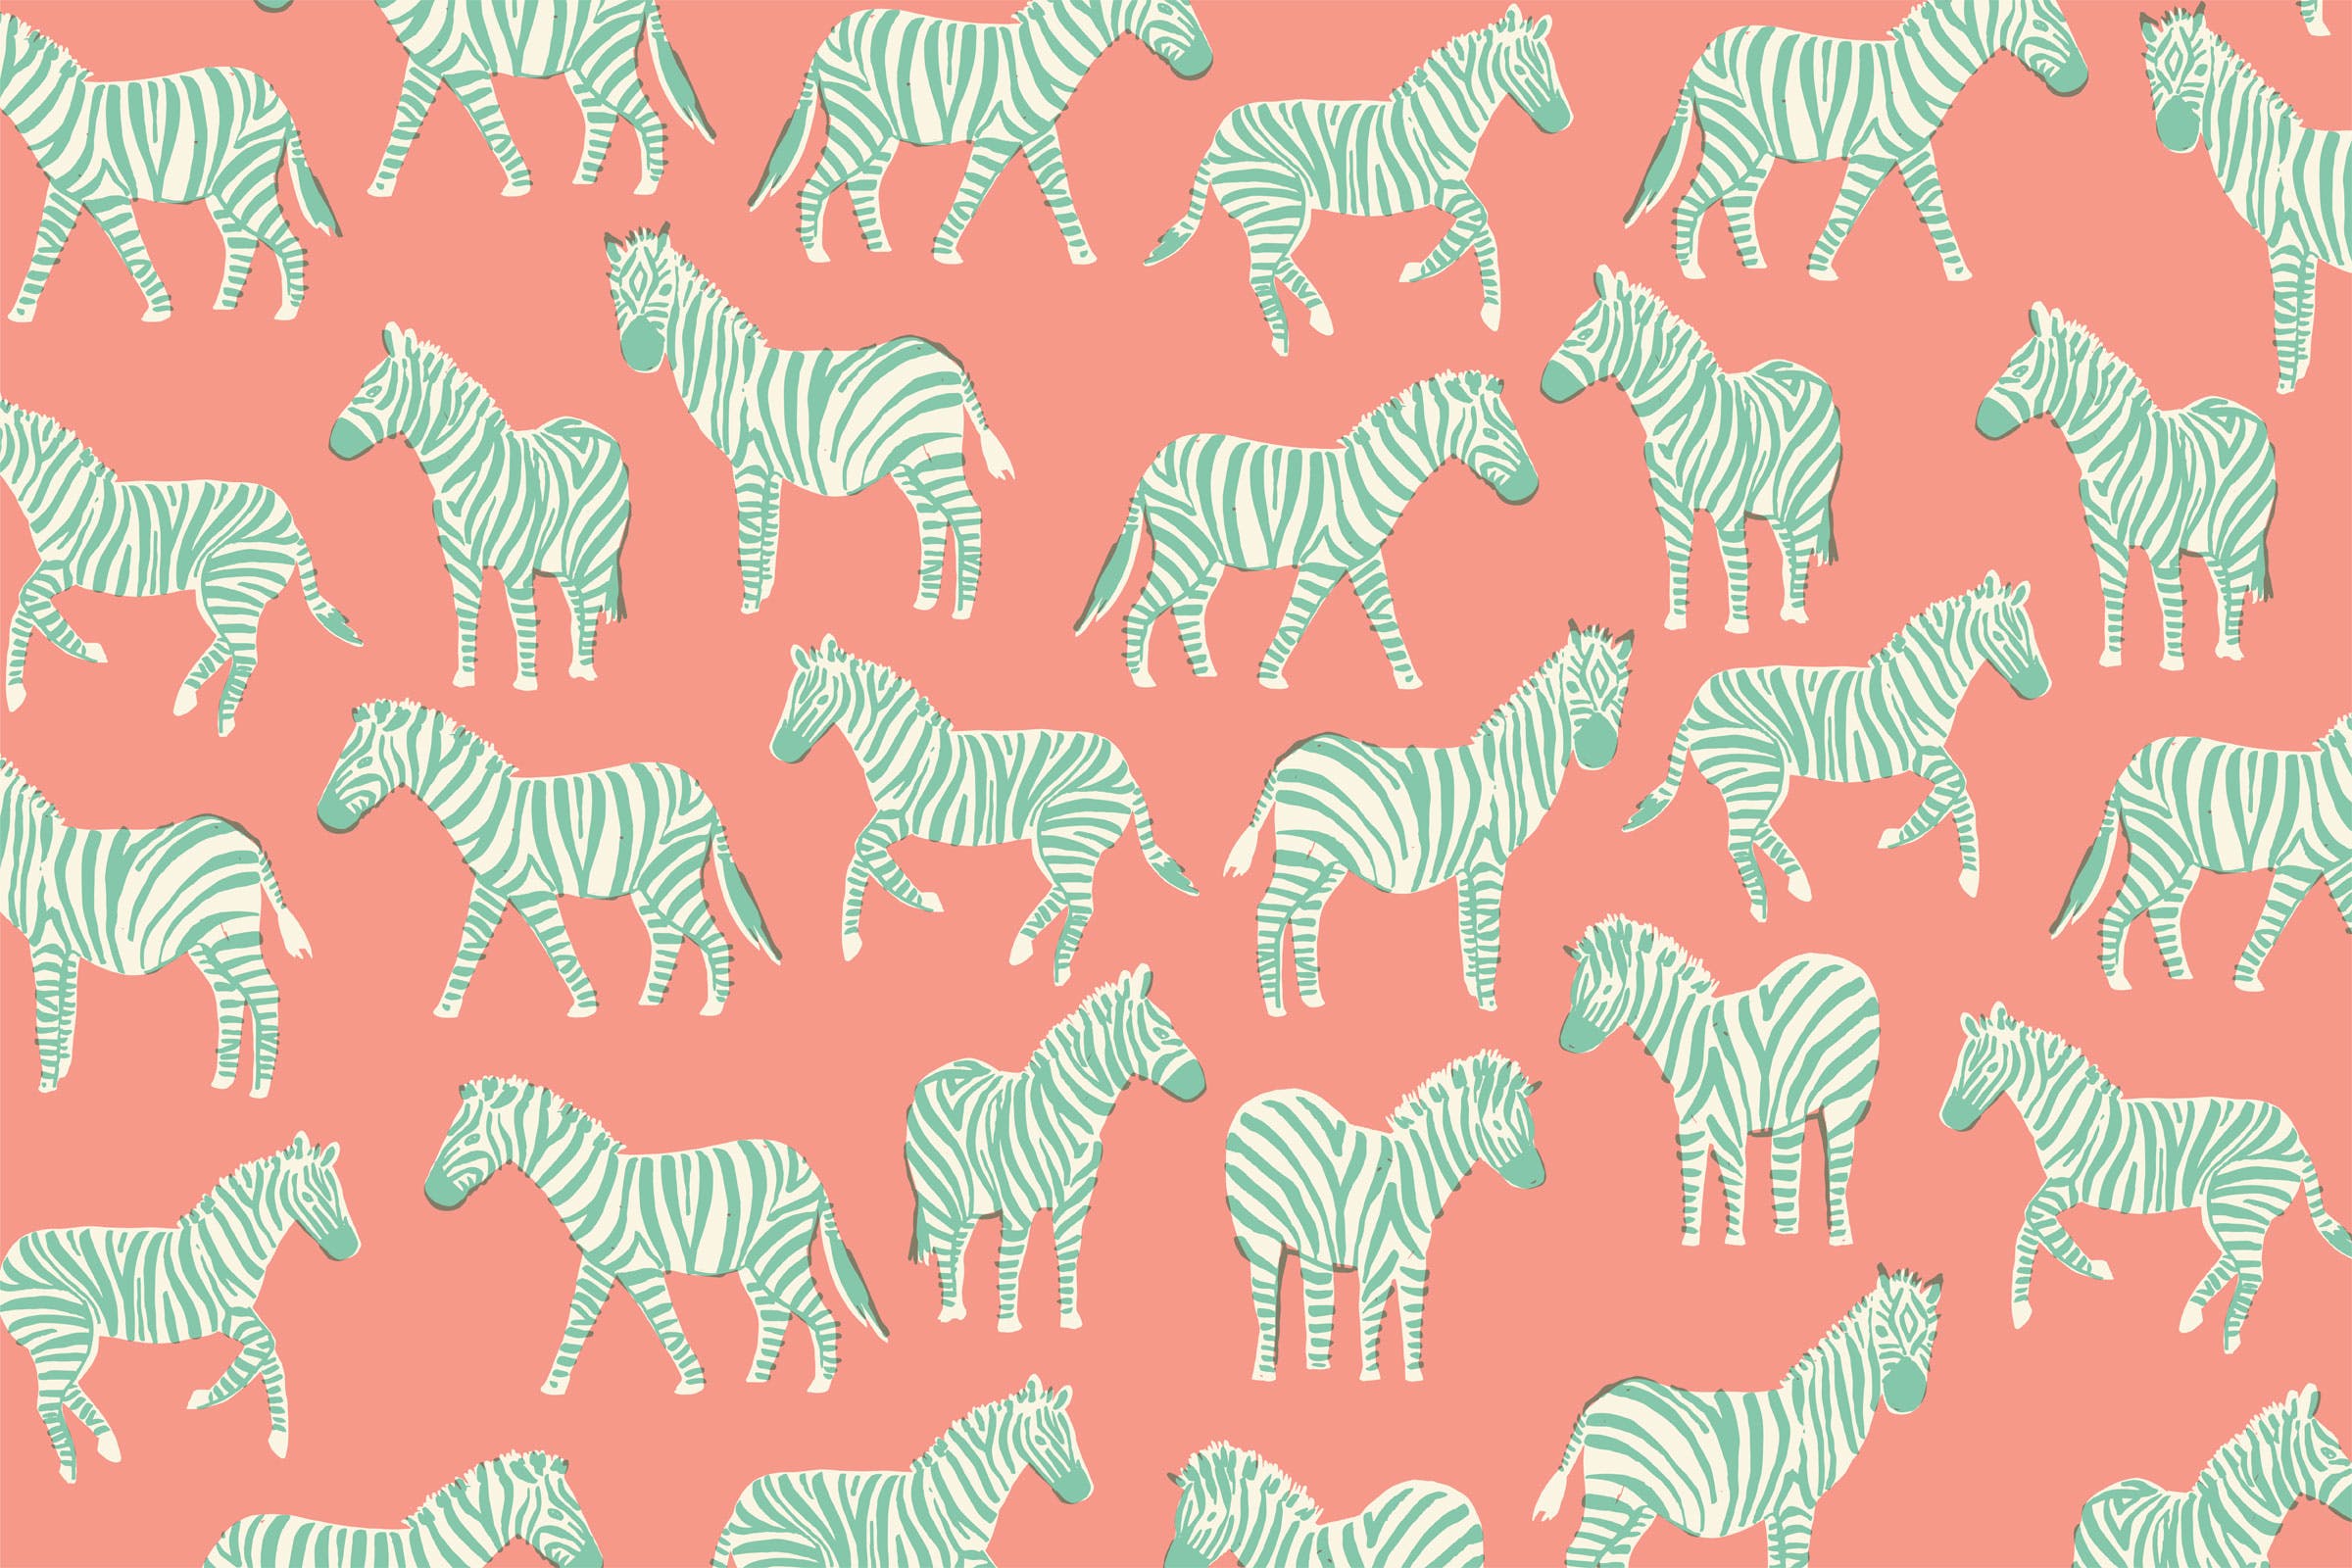 Whimsical Computer Wallpapers